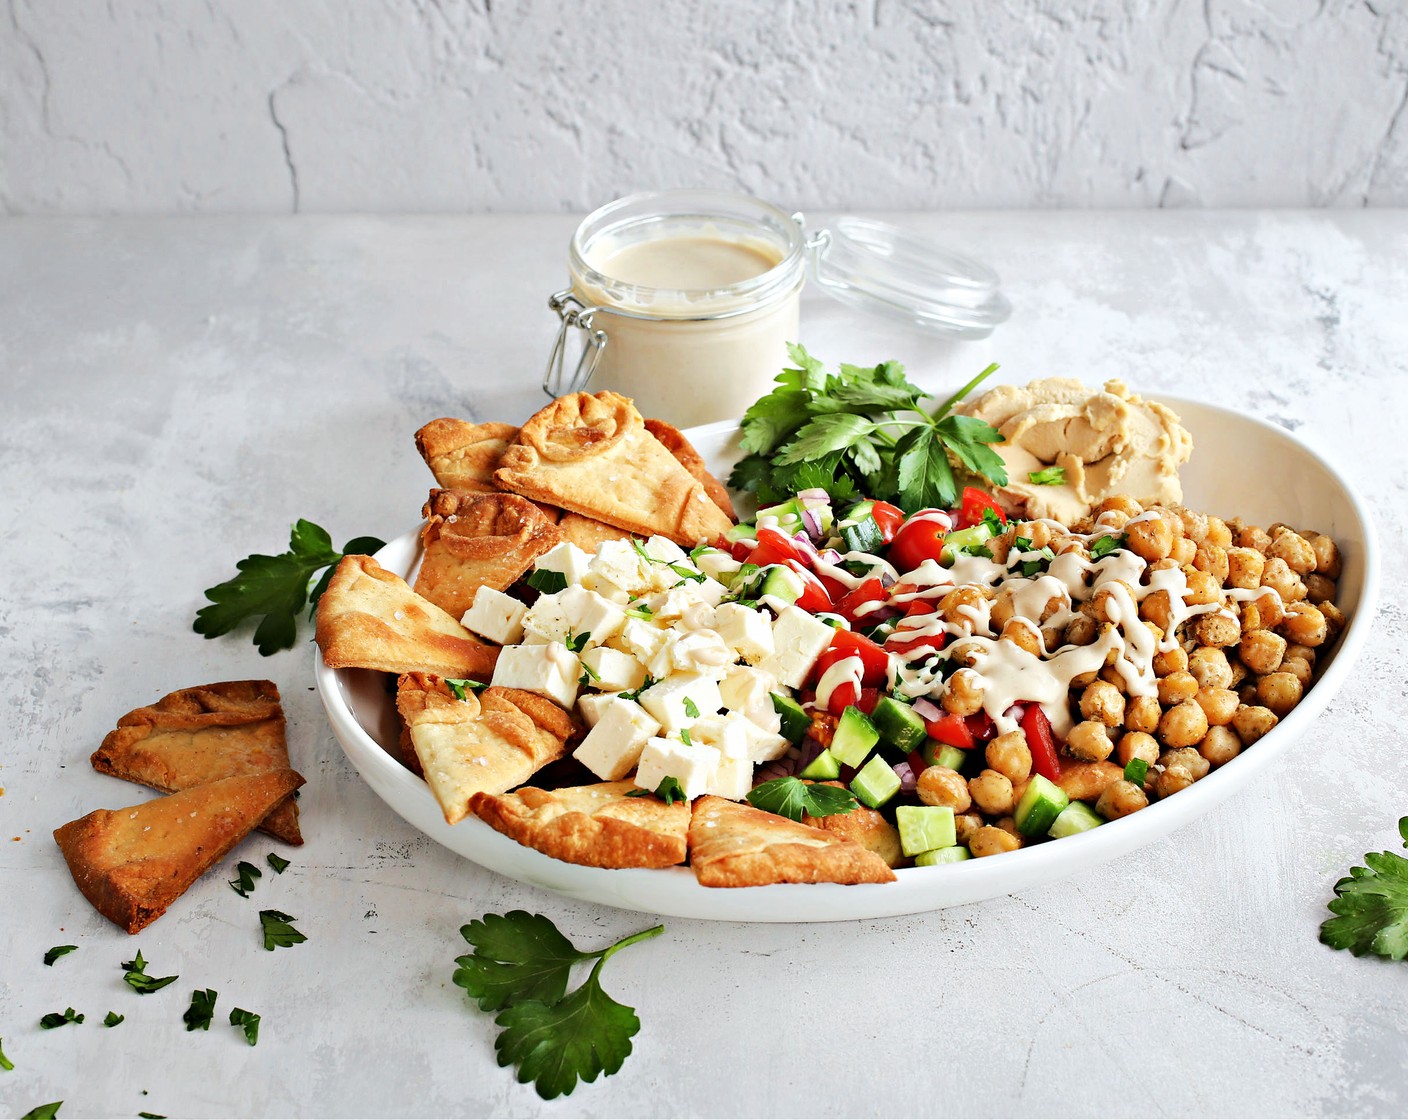 step 7 To assemble, place the baked pita chips on a platter and top with the roasted chickpeas, Seedless Cucumber (1), Cherry Tomatoes (2 cups), Red Onion (1/2), Feta Cheese (3/4 cup), and dollops of the Hummus (1 cup). Drizzle with the tahini sauce and serve extra on the side.